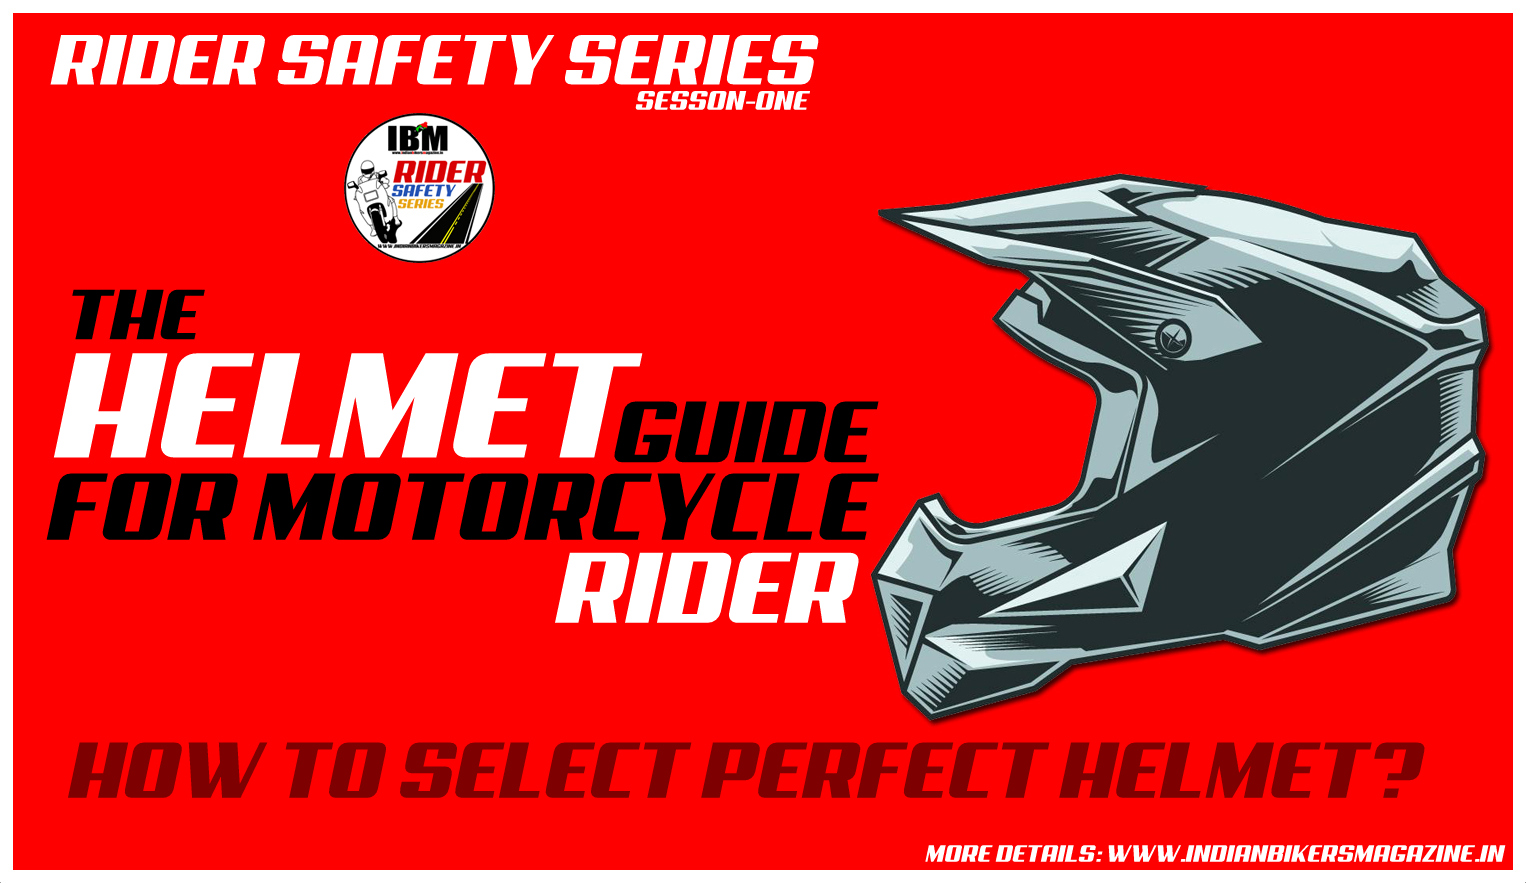 How To Select Perfect Motorcycle Helmet | Rider Safety Series | Season - One